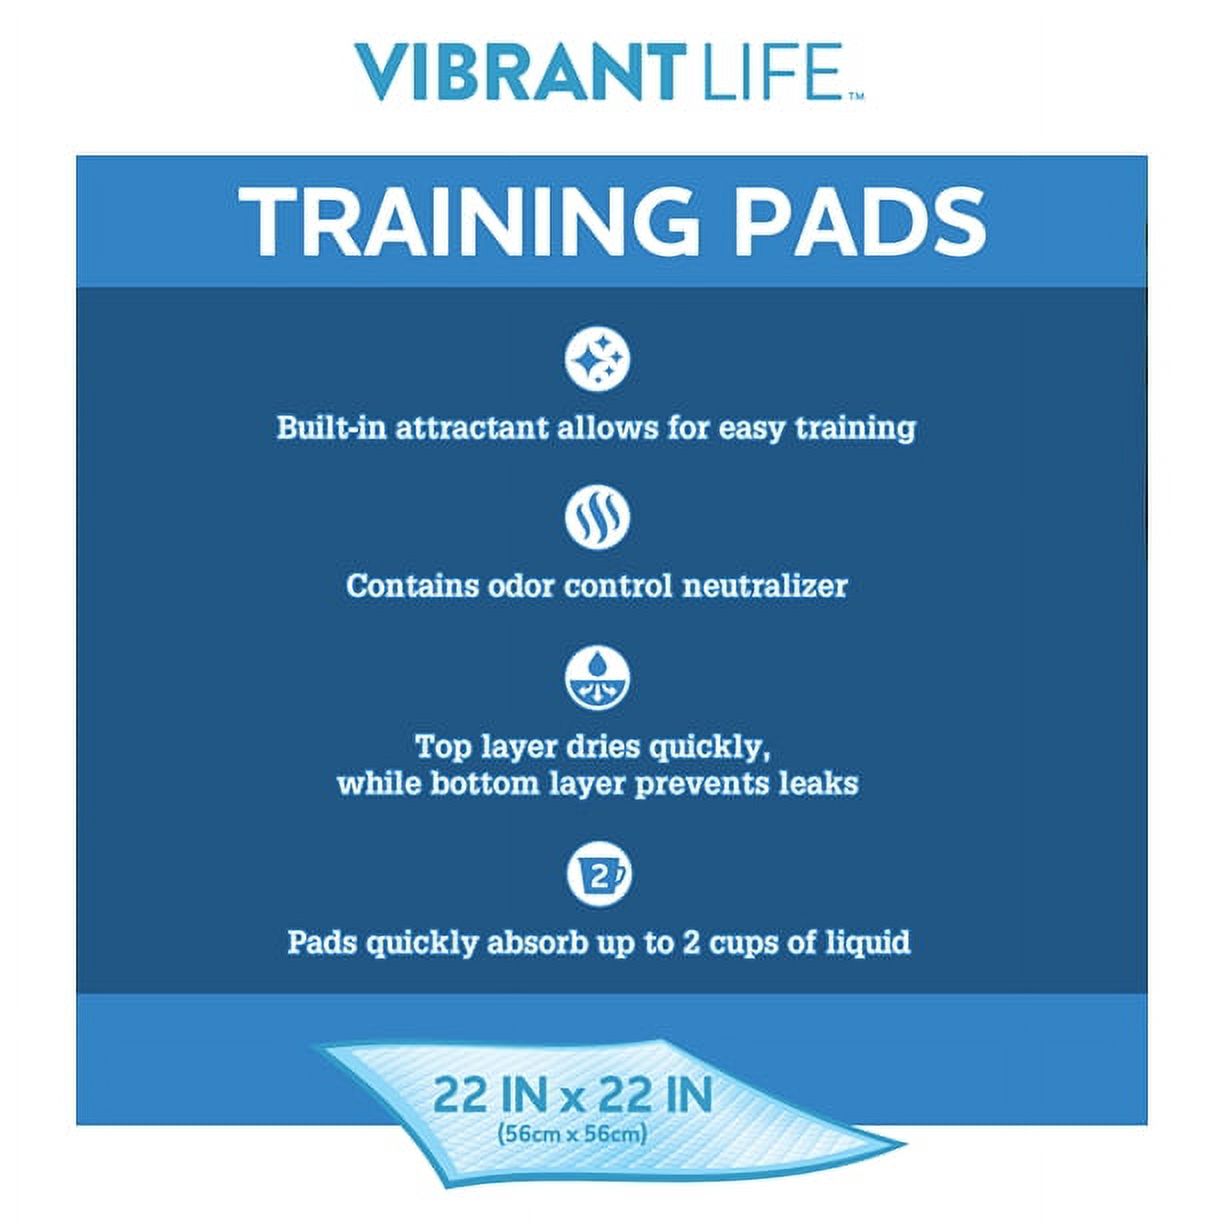 Vibrant Life Training Pads, Dog & Puppy Pads, L, 22 in x 22 in,100 Count - image 5 of 7